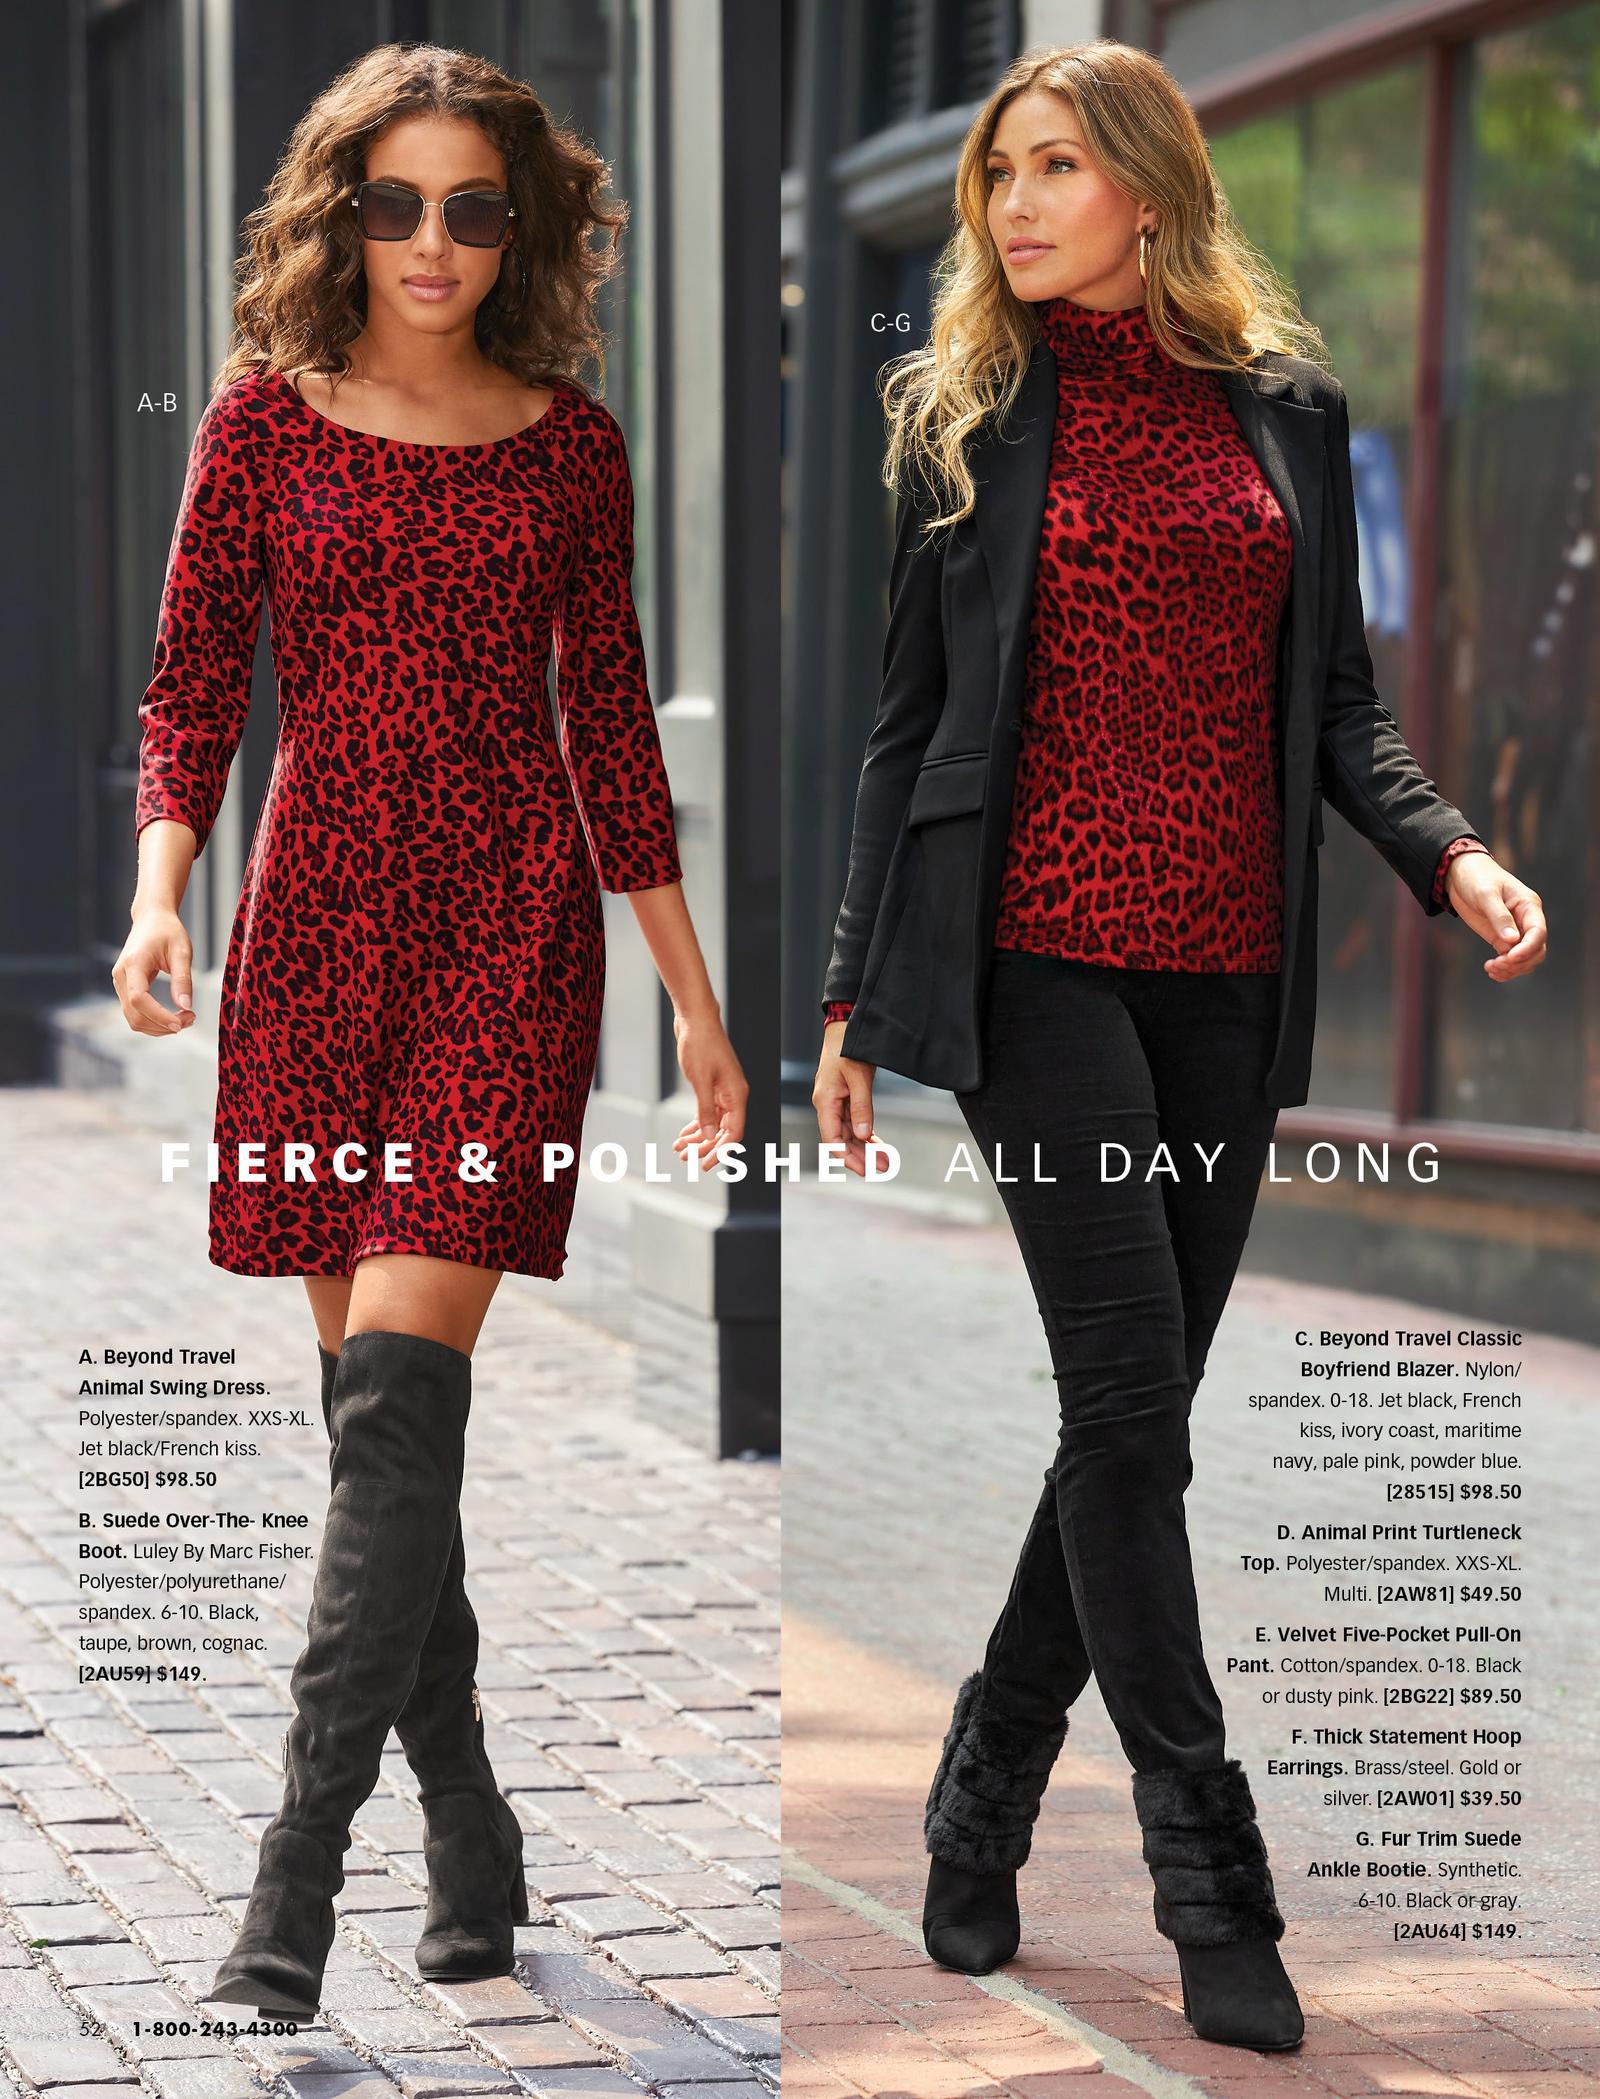 left model wearing a red animal print long-sleeve dress and black suede over-the-knee boots. right model wearing a black blazer, red animal print turtleneck top, back velvet pants, and black suede over-the-knee boots.